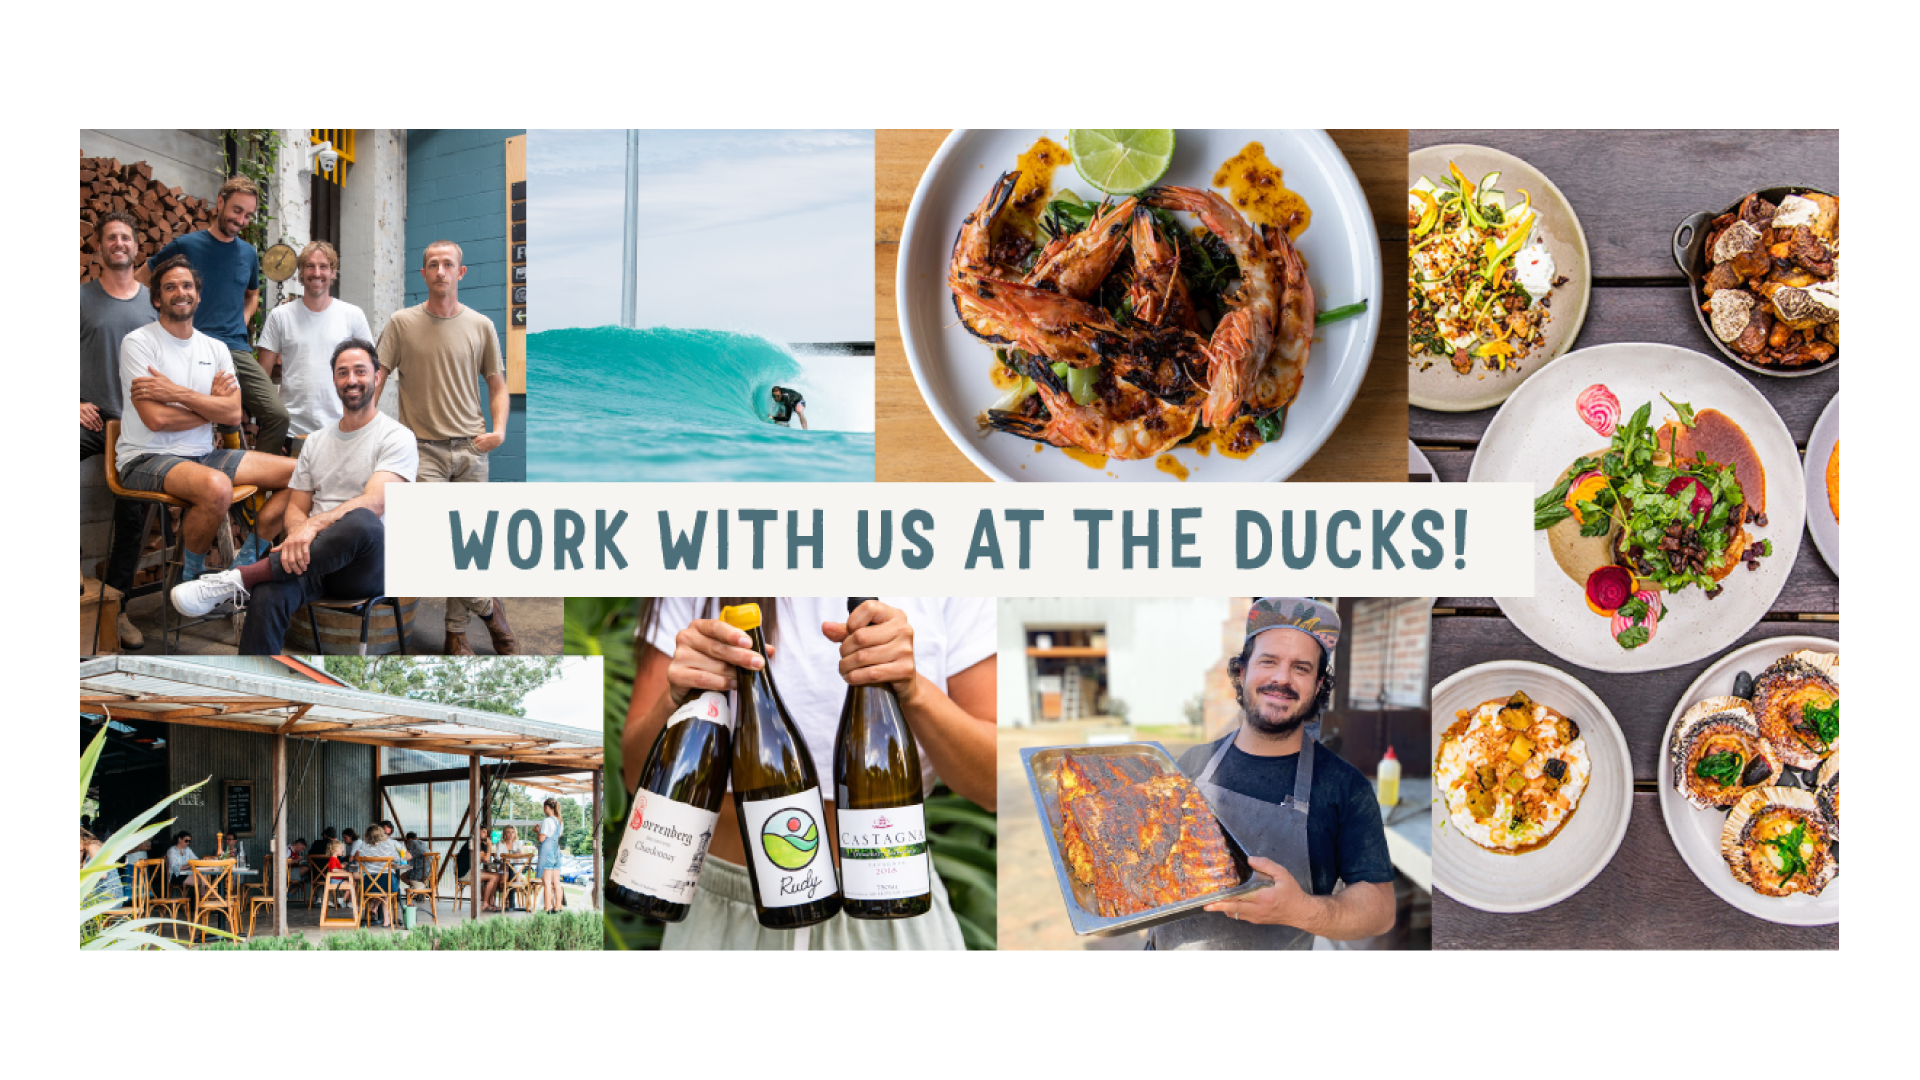 WORK WITH US AT THE DUCKS!